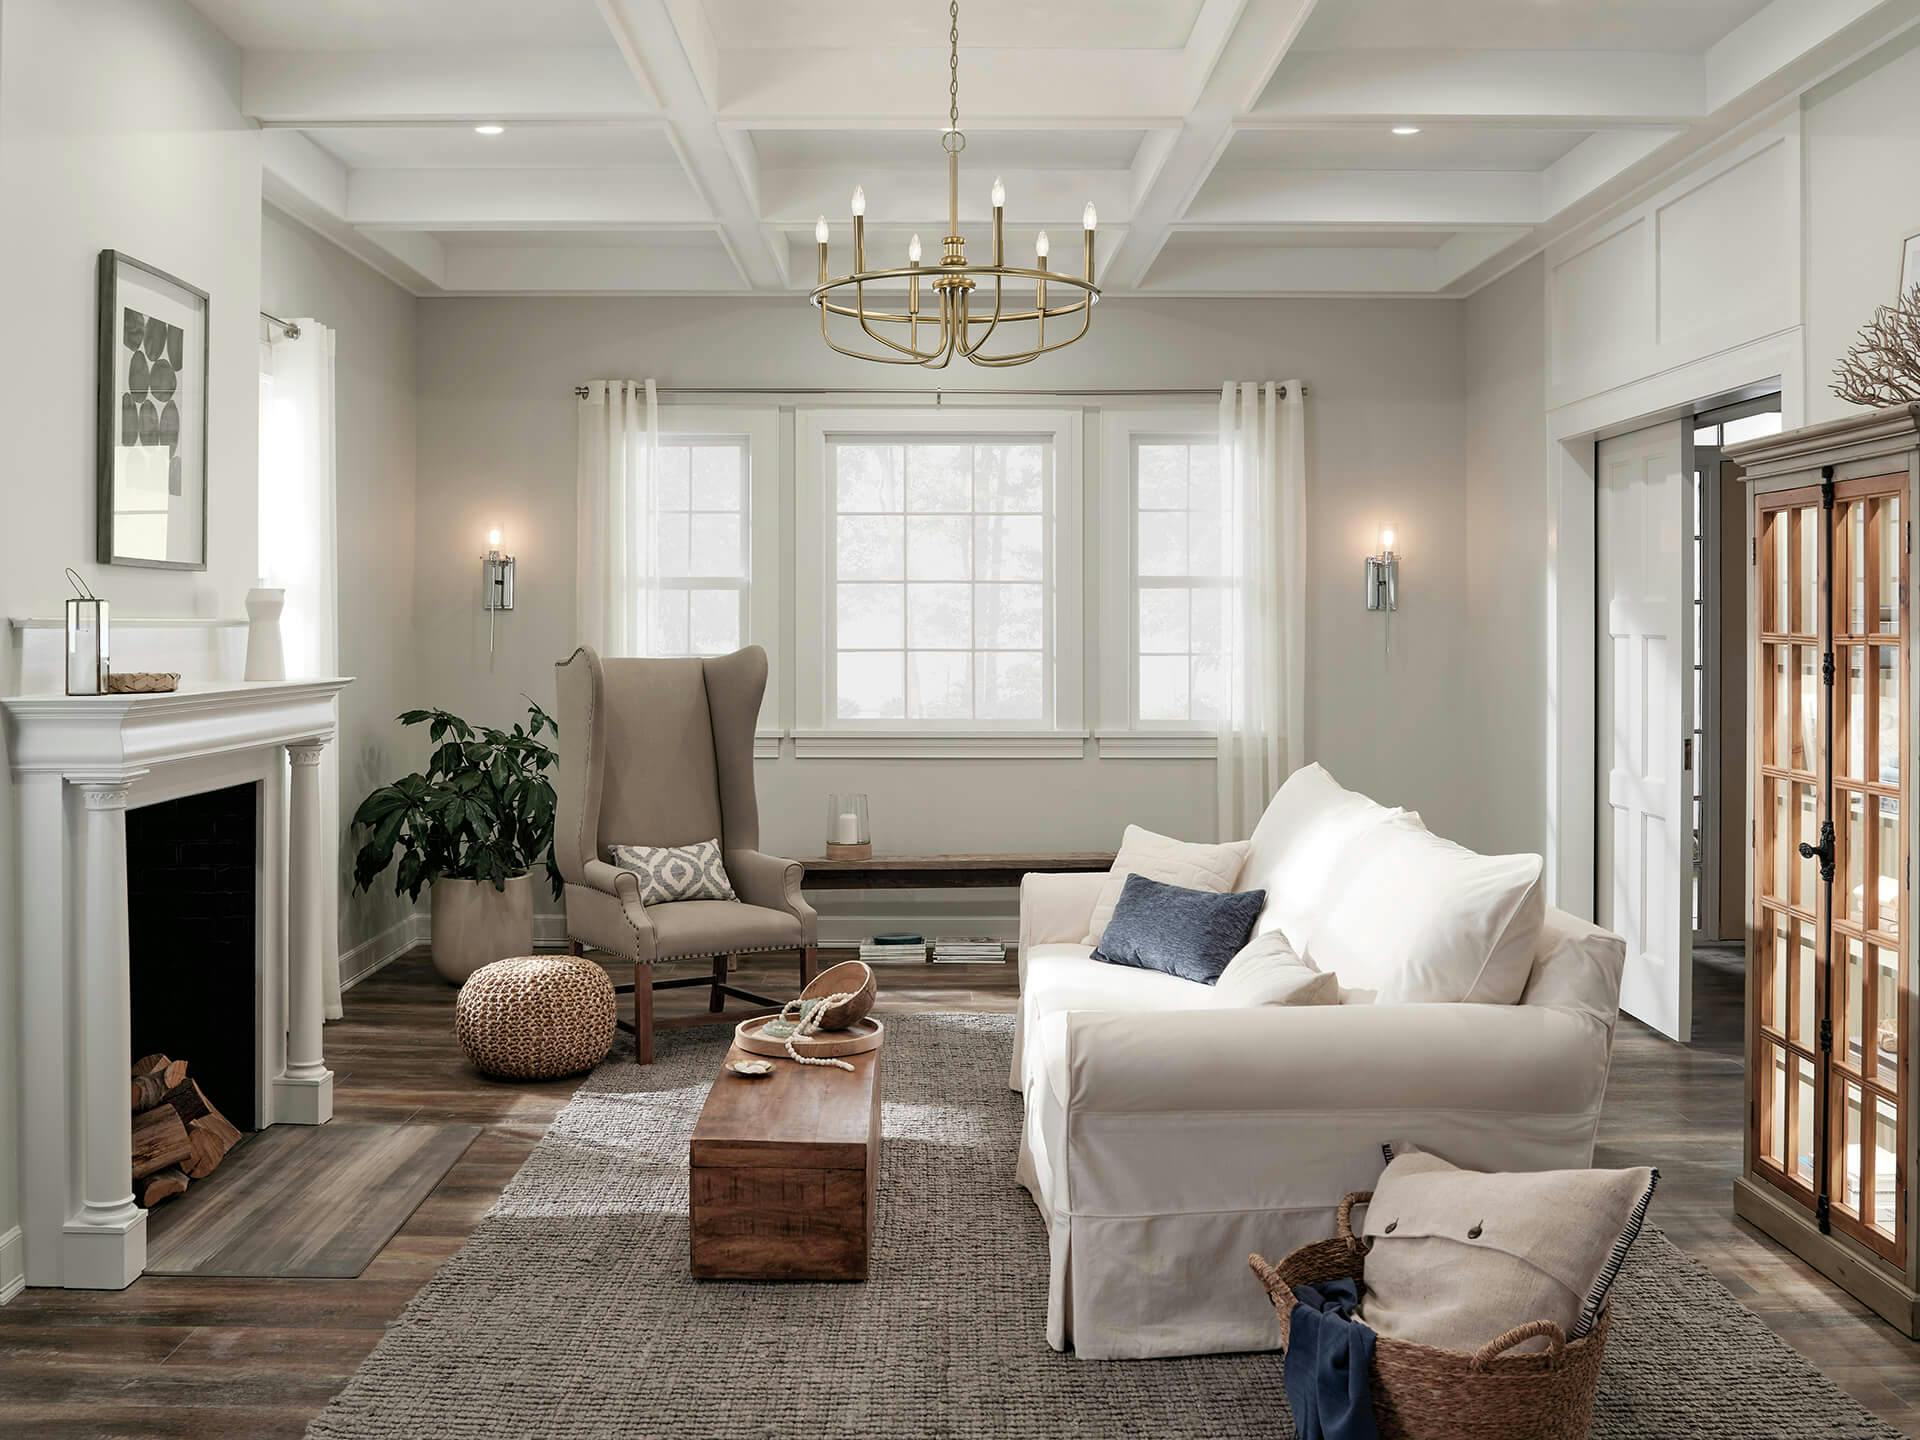 Living room at day with white walls featuring two silver Alton sconces on the back wall while a gold Capitol Hill chandelier hangs above